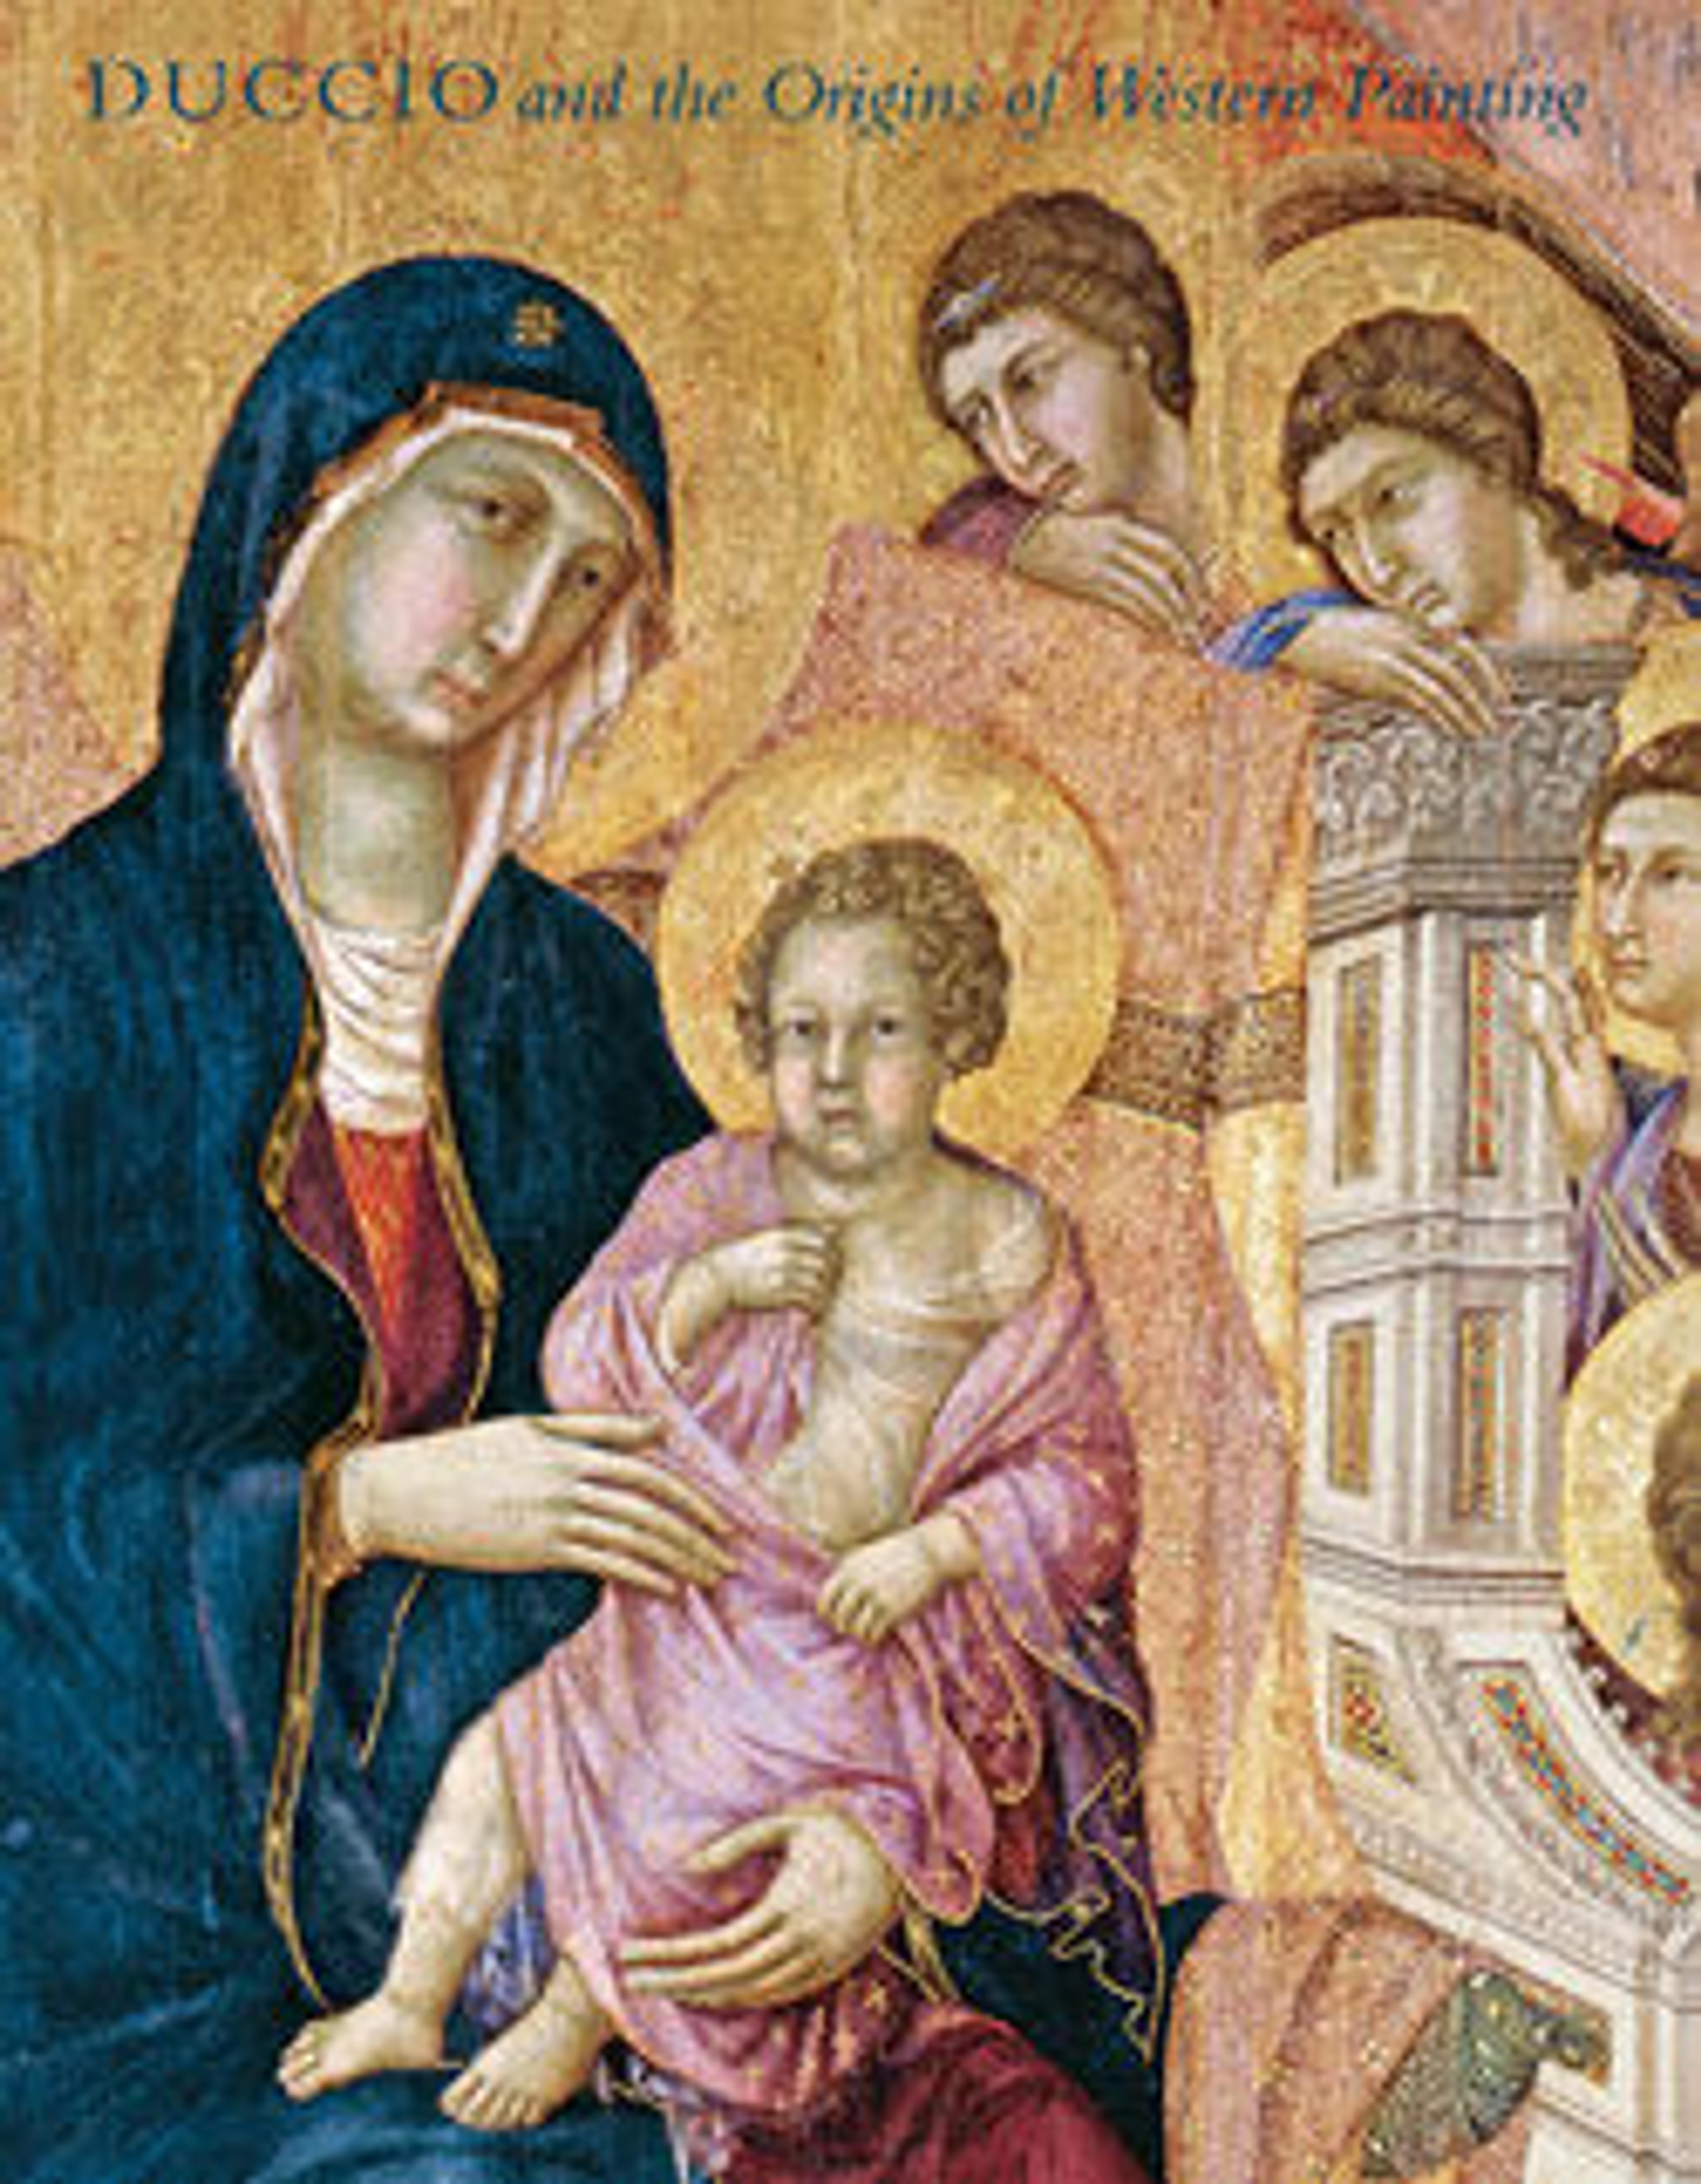 Duccio and the Origins of Western Painting